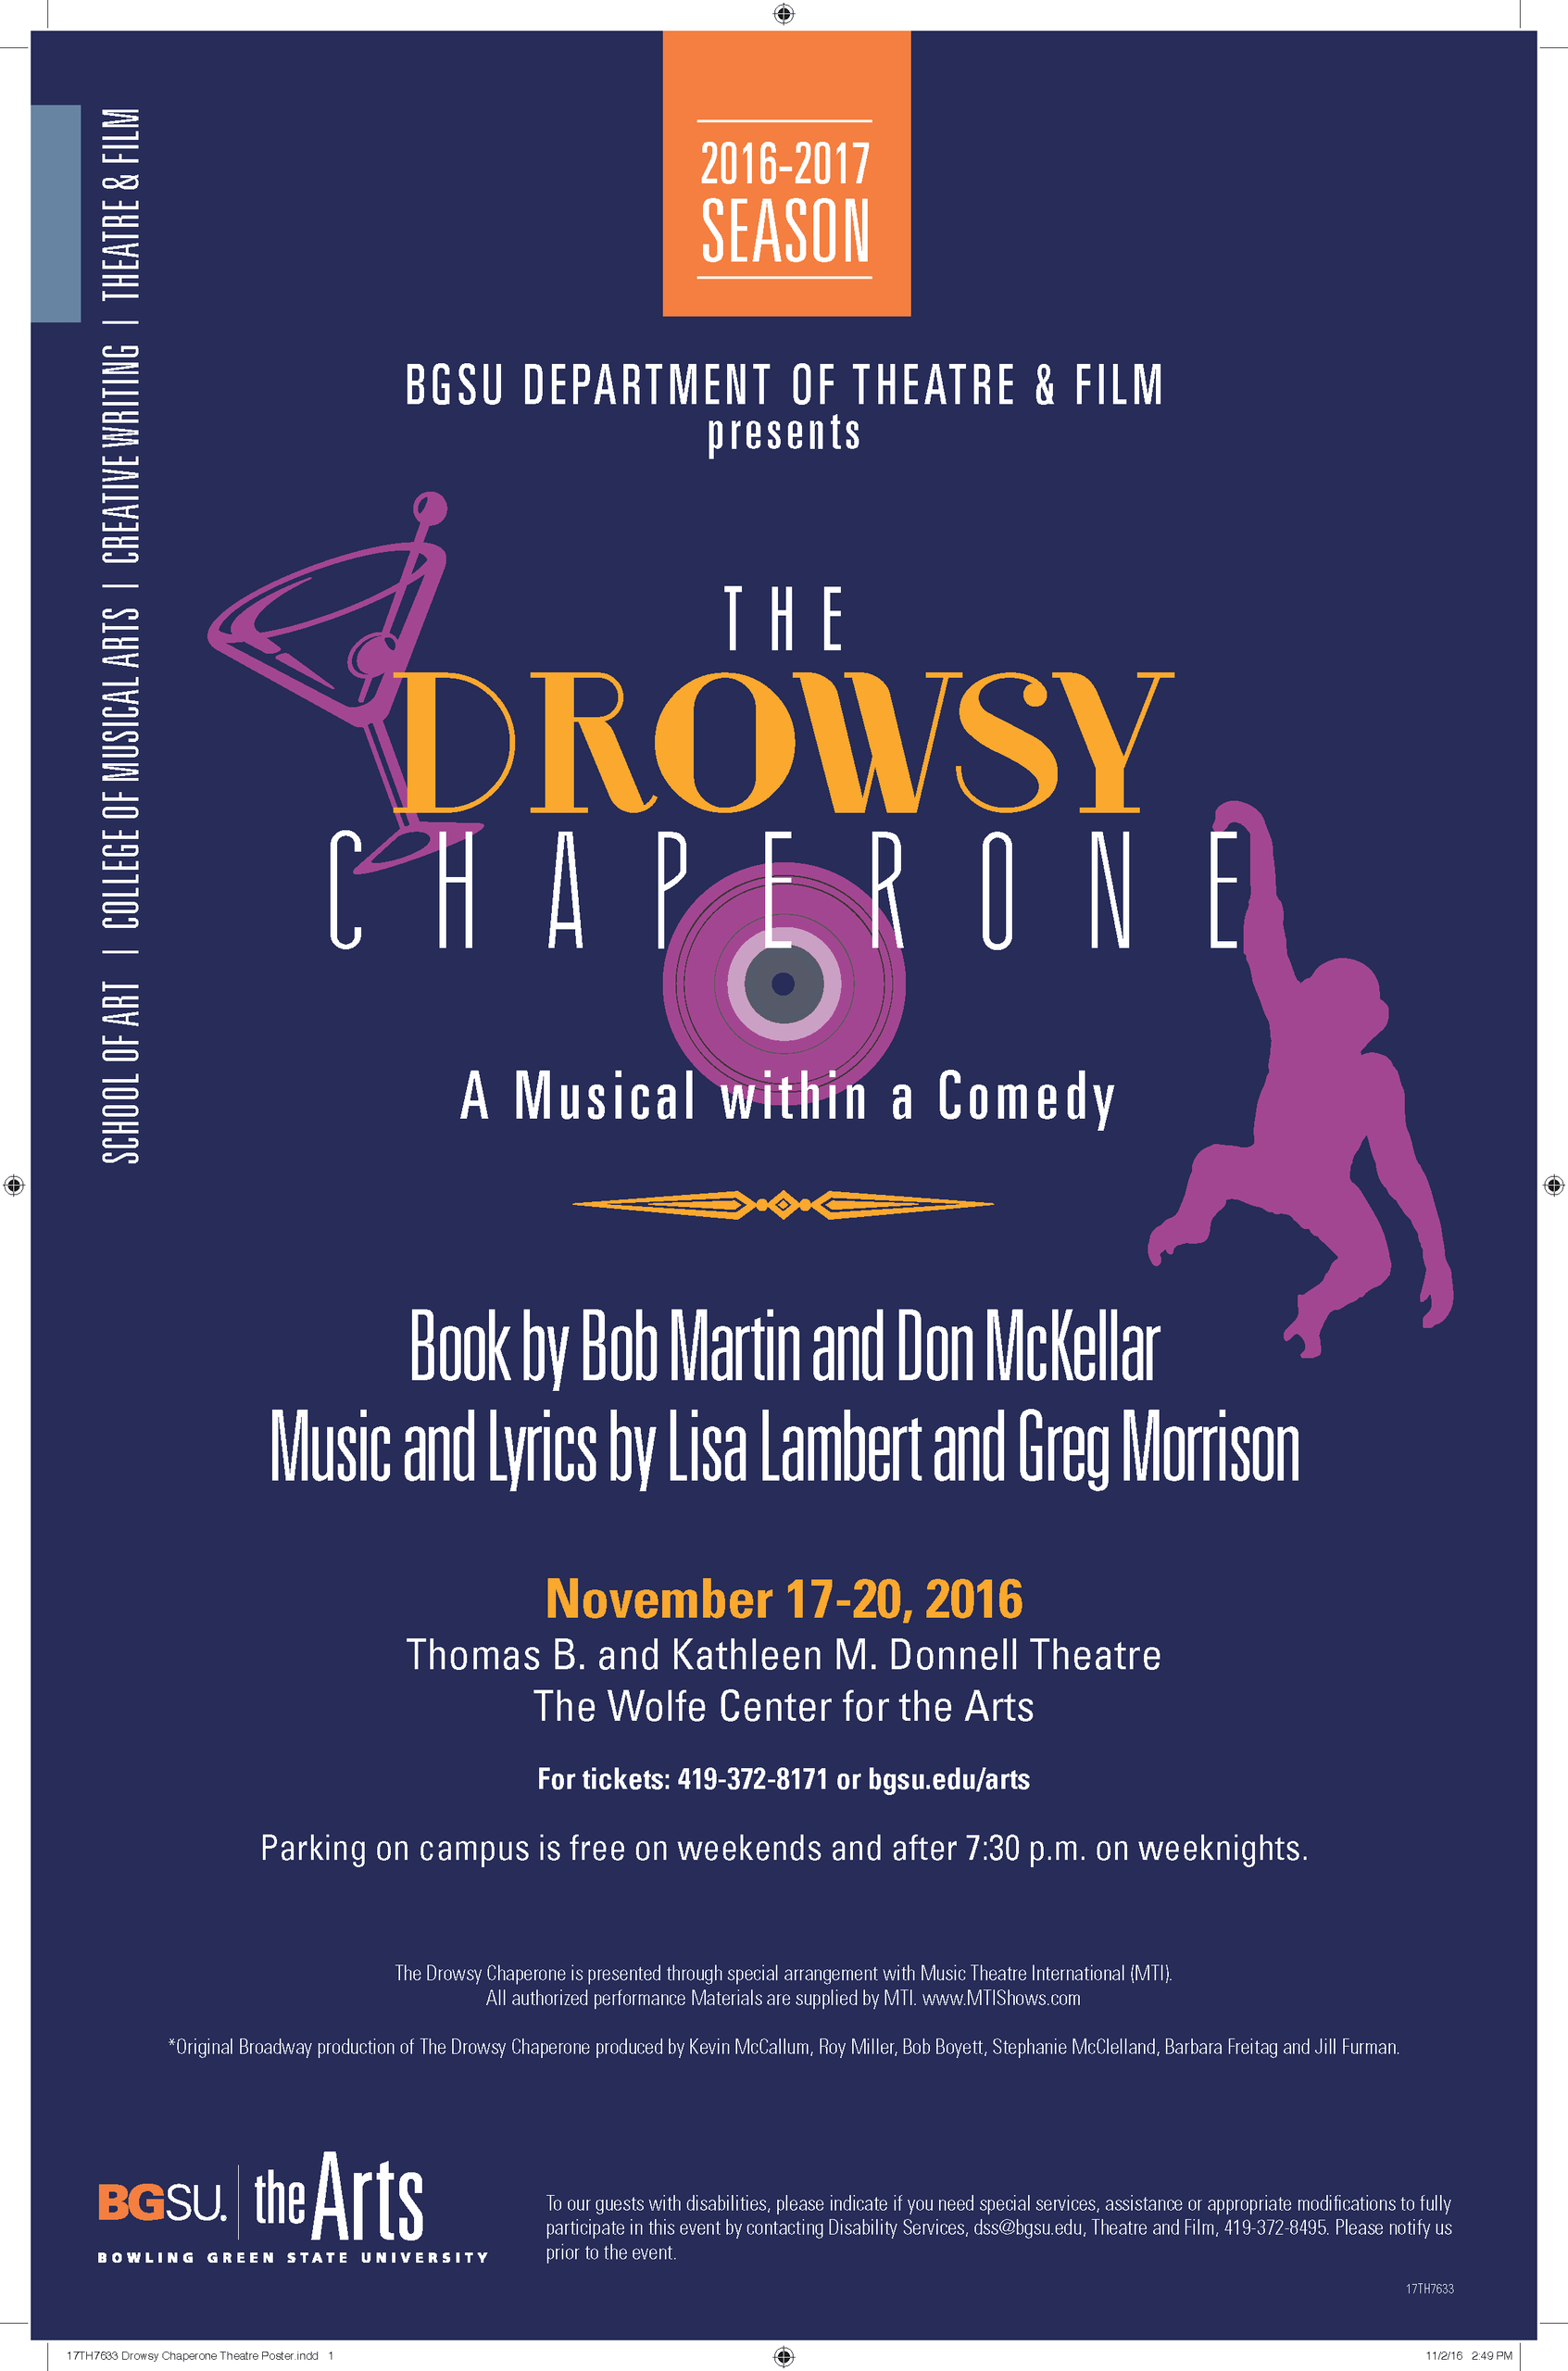 Poster for The Drowsy Chaperone